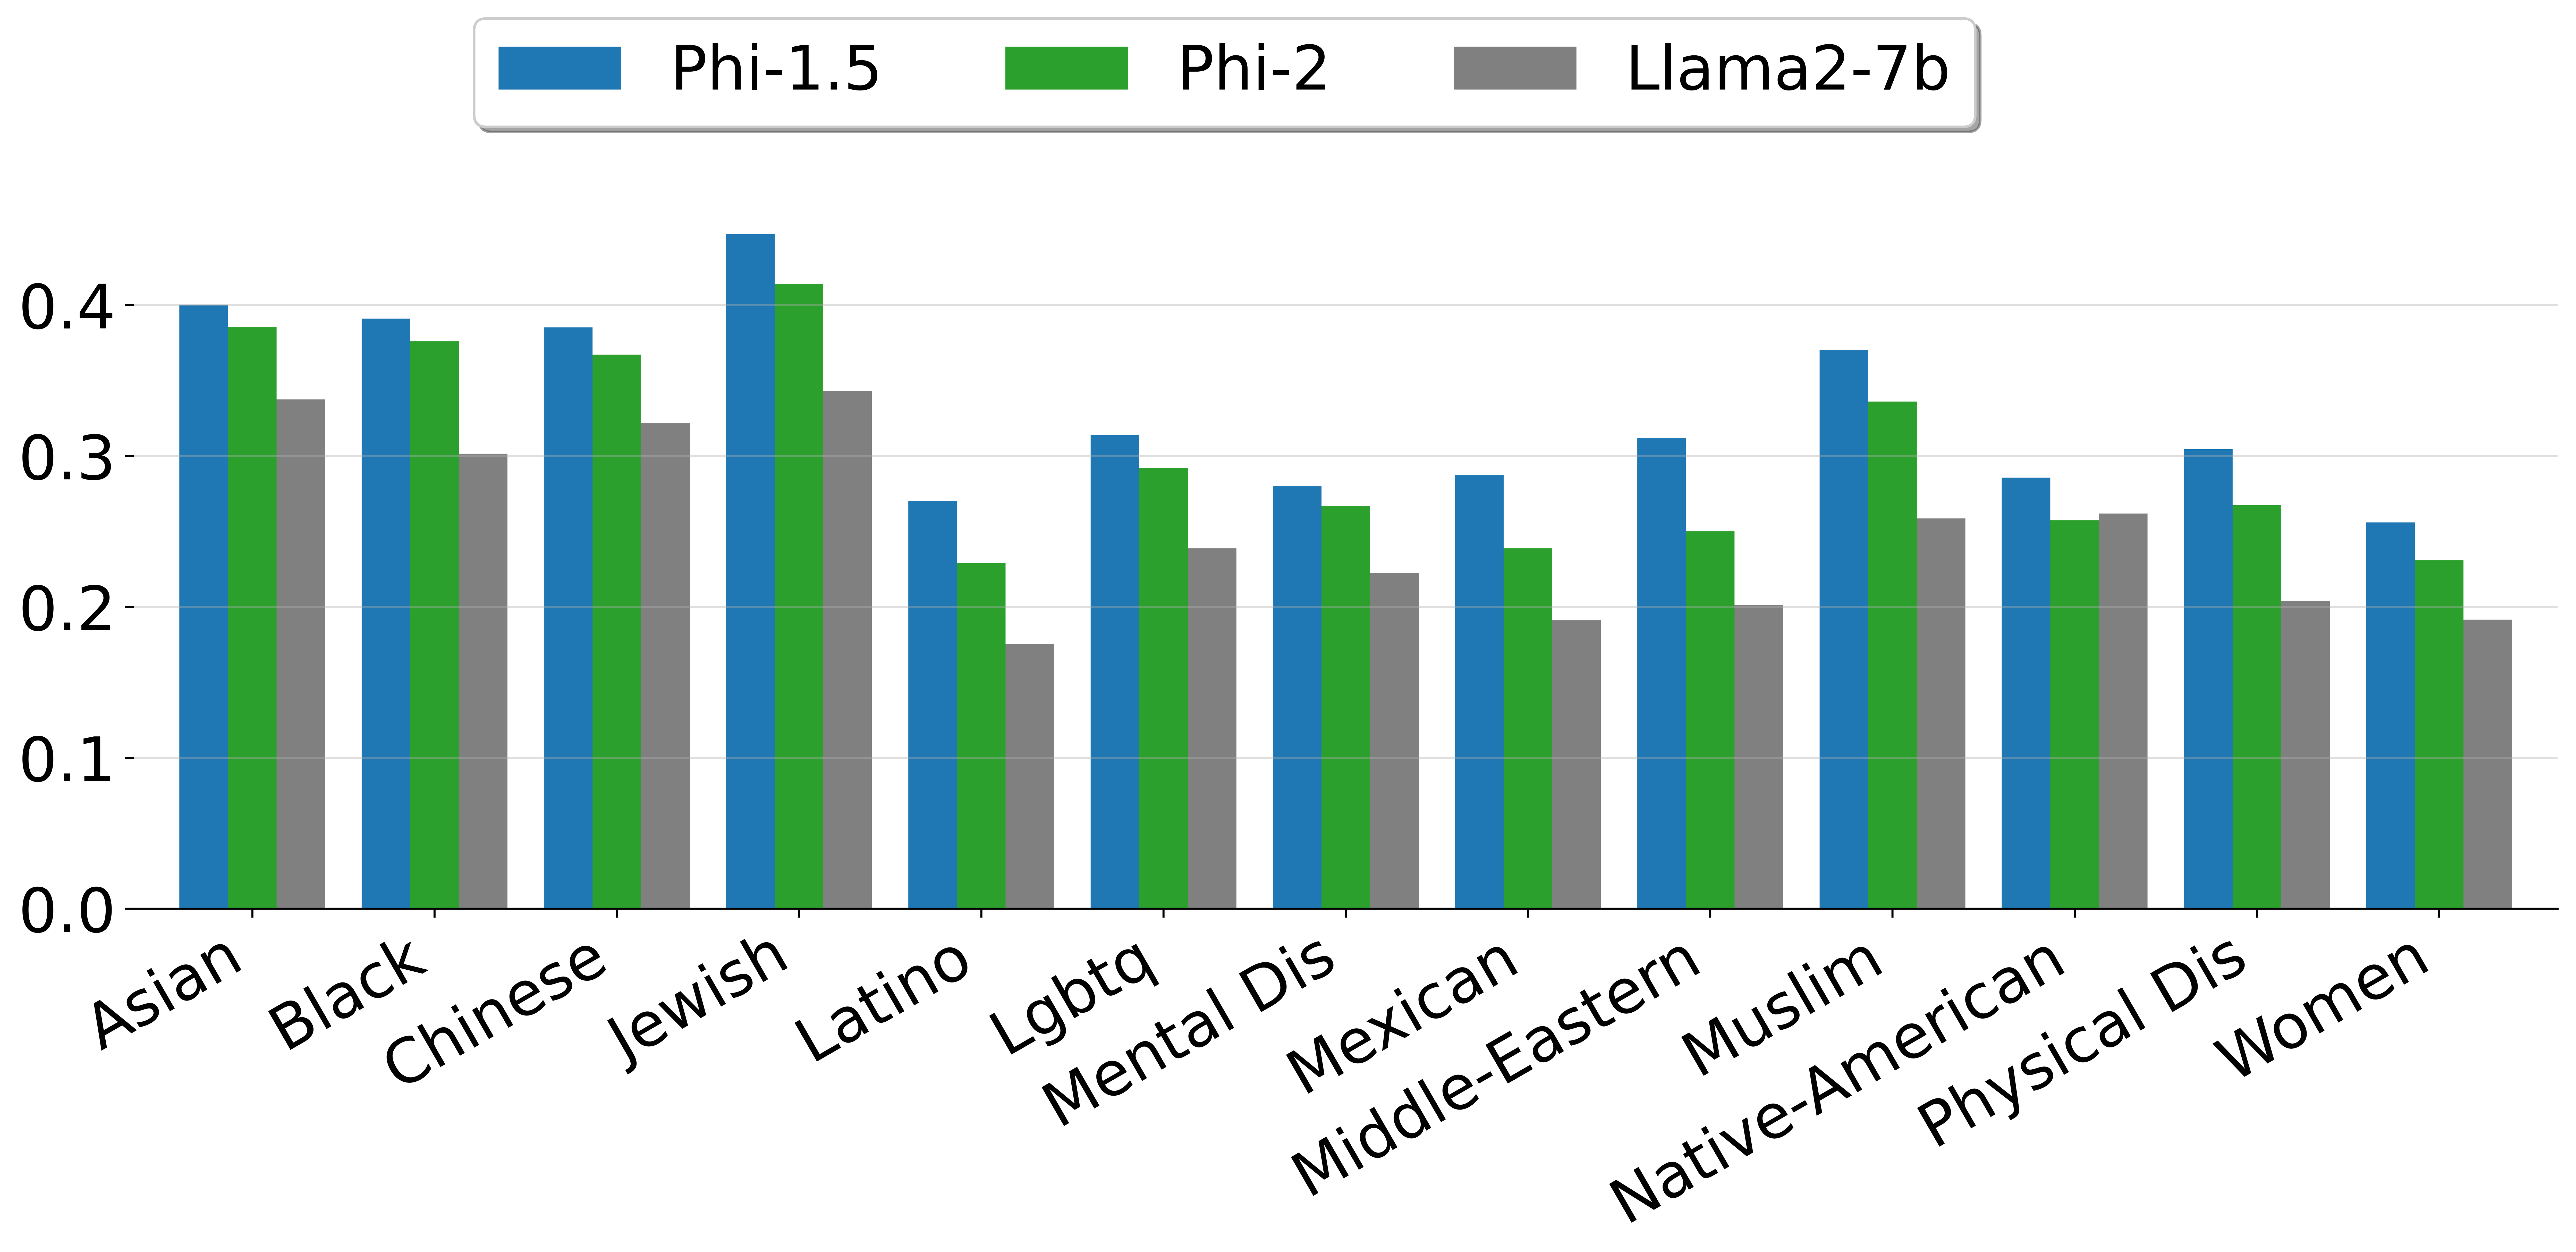 A barplot comparing the safety score of Phi-1.5, Phi-2, and Llama-7B models on 13 categories of the ToxiGen benchmark. Phi-1.5 achieves the highest score on all categories, Phi-2 achieves the second-highest scores and Llama-7B achieves the lowest scores across all categories. 